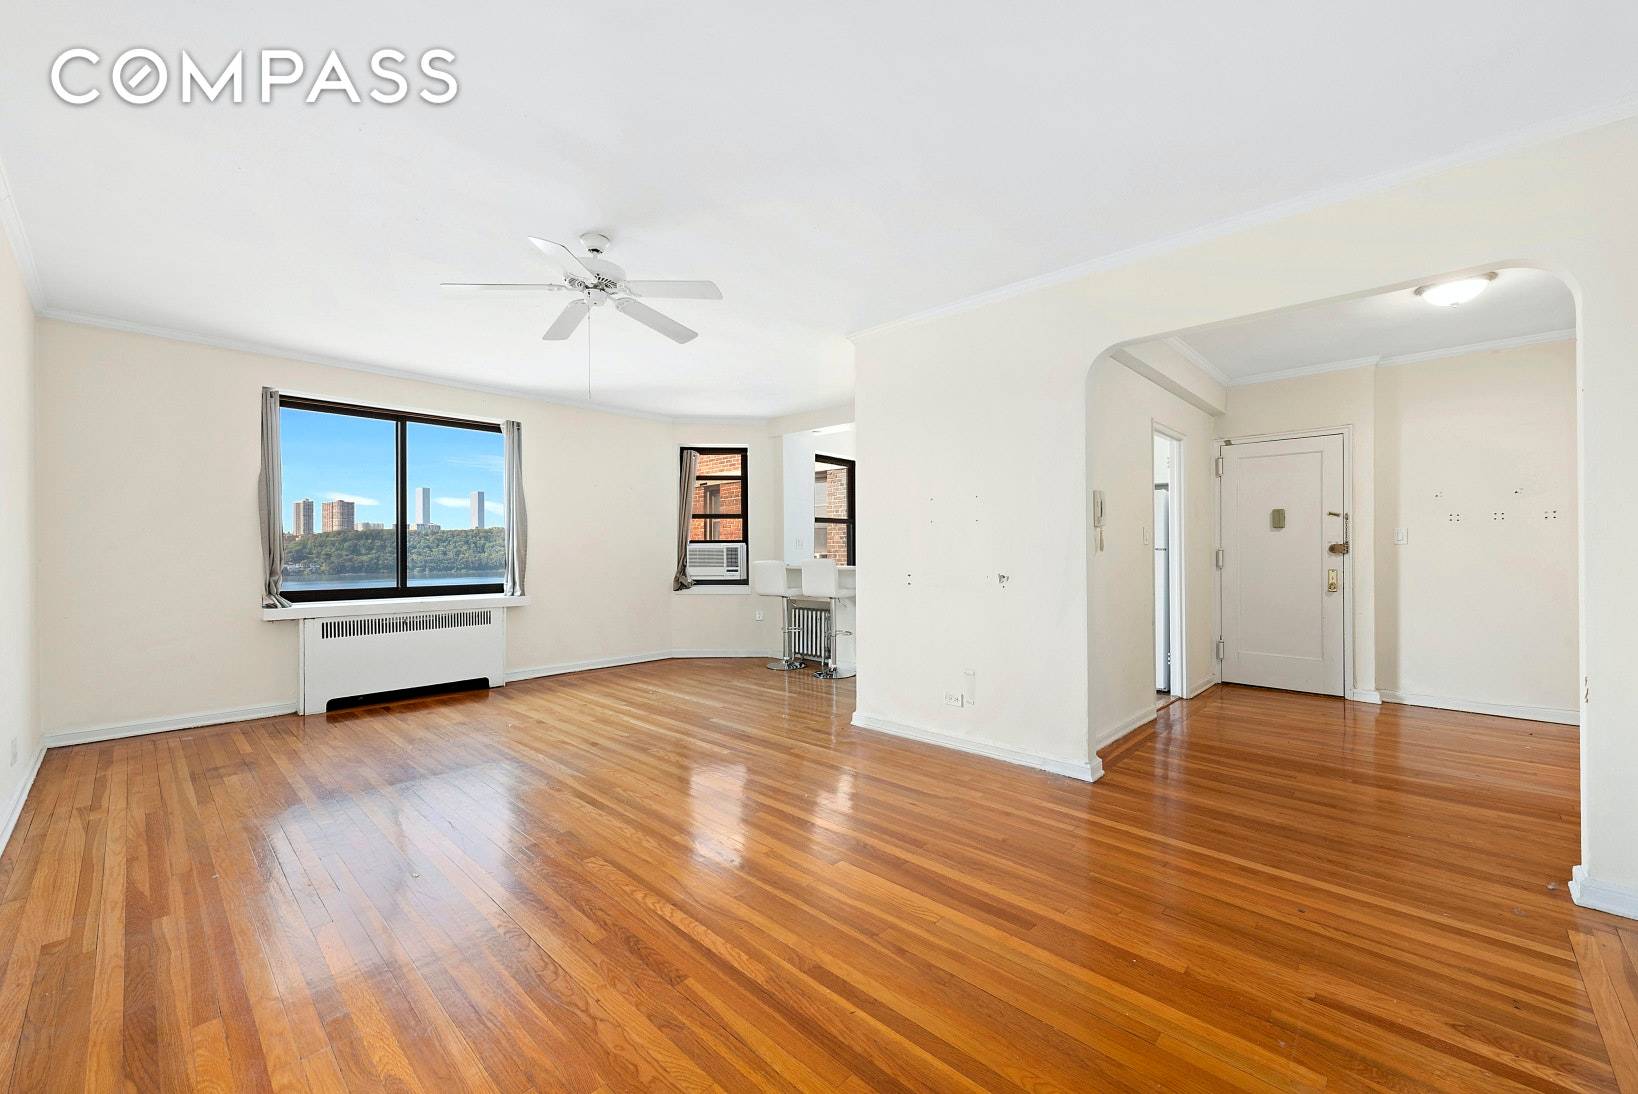 No Board Approval ! ! This remarkably spacious 1 bedroom apartment boasts tremendous views of the Hudson River.